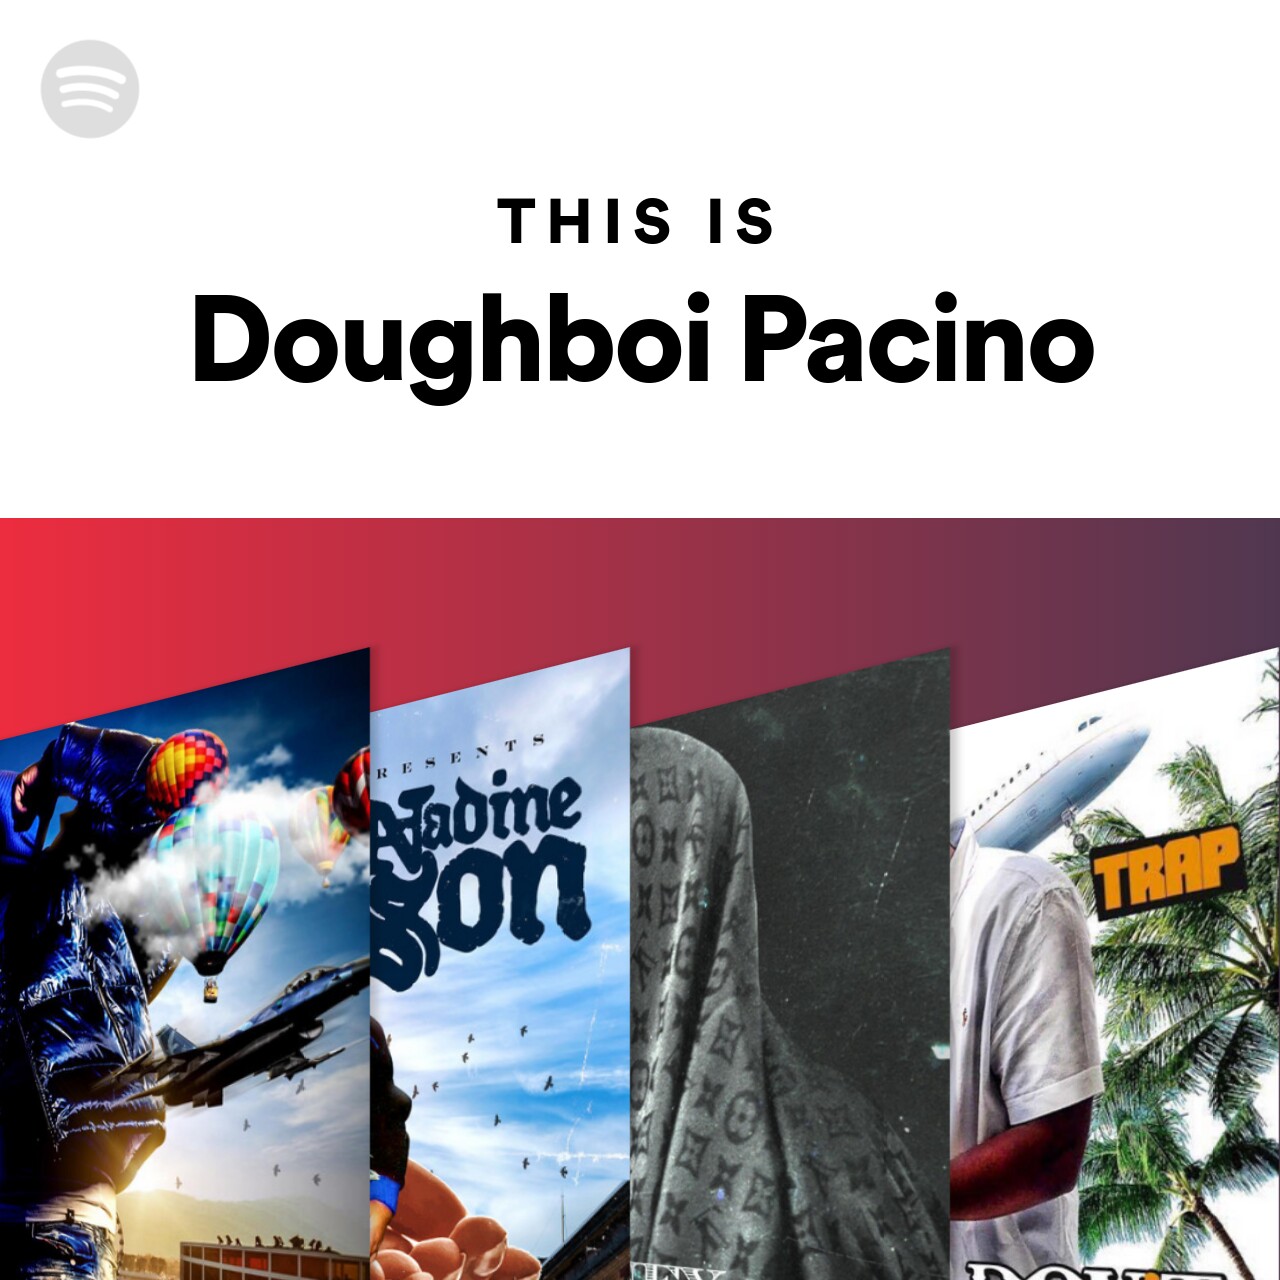 This Is Doughboi Pacino